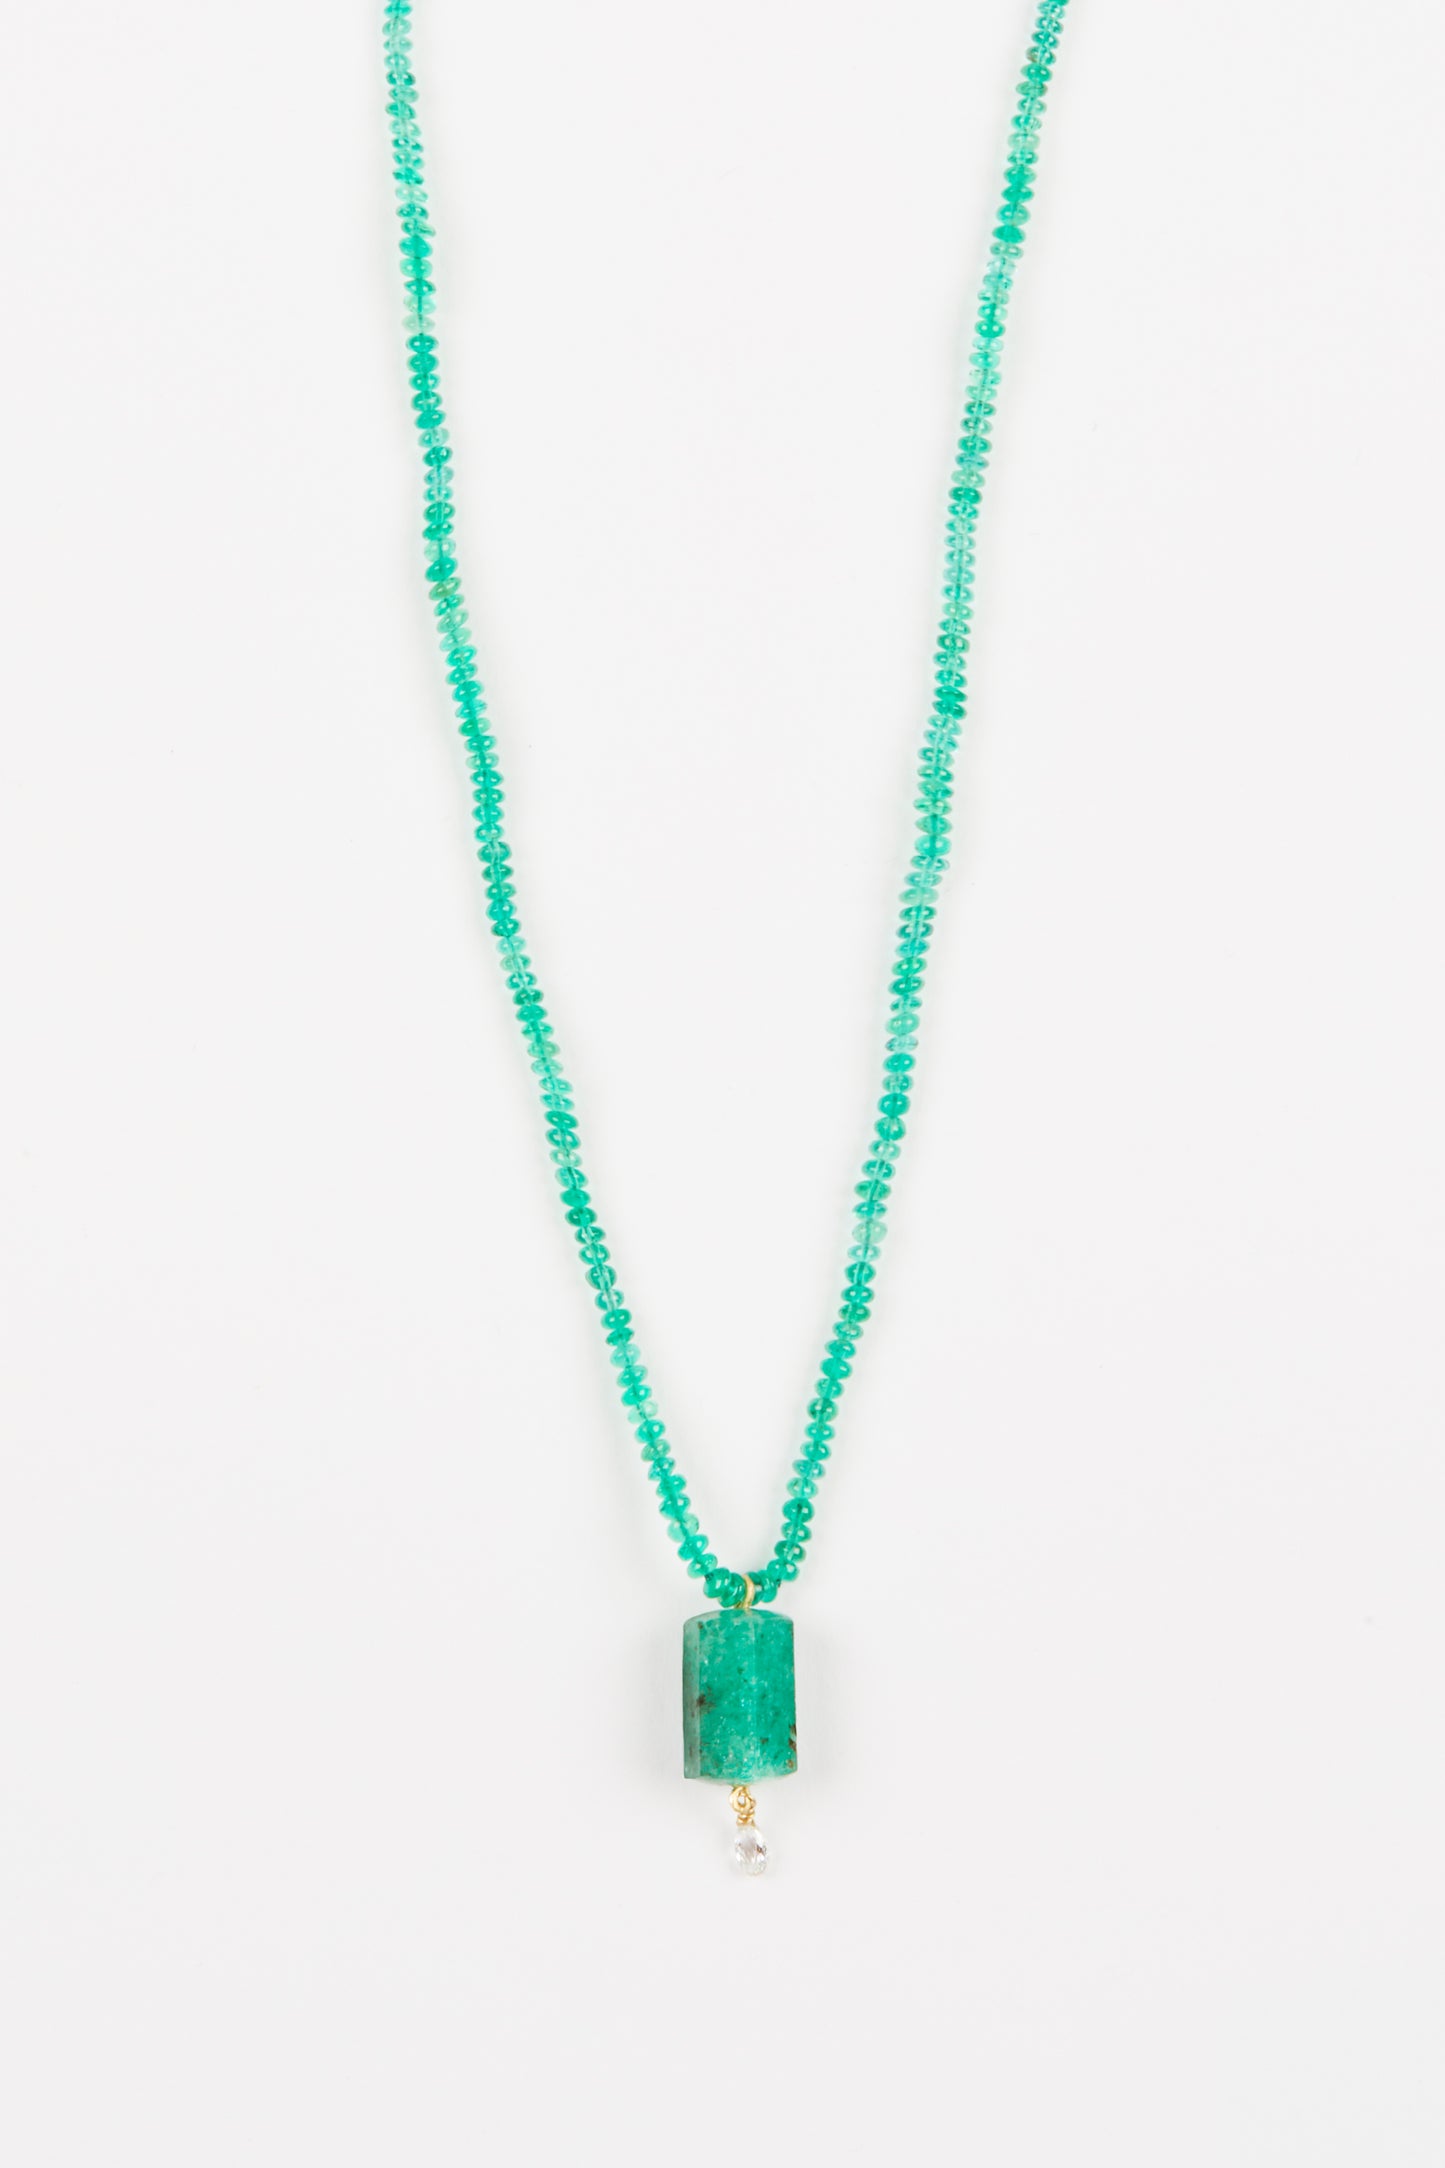 Emerald Beads with Emerald and Diamond Briolette